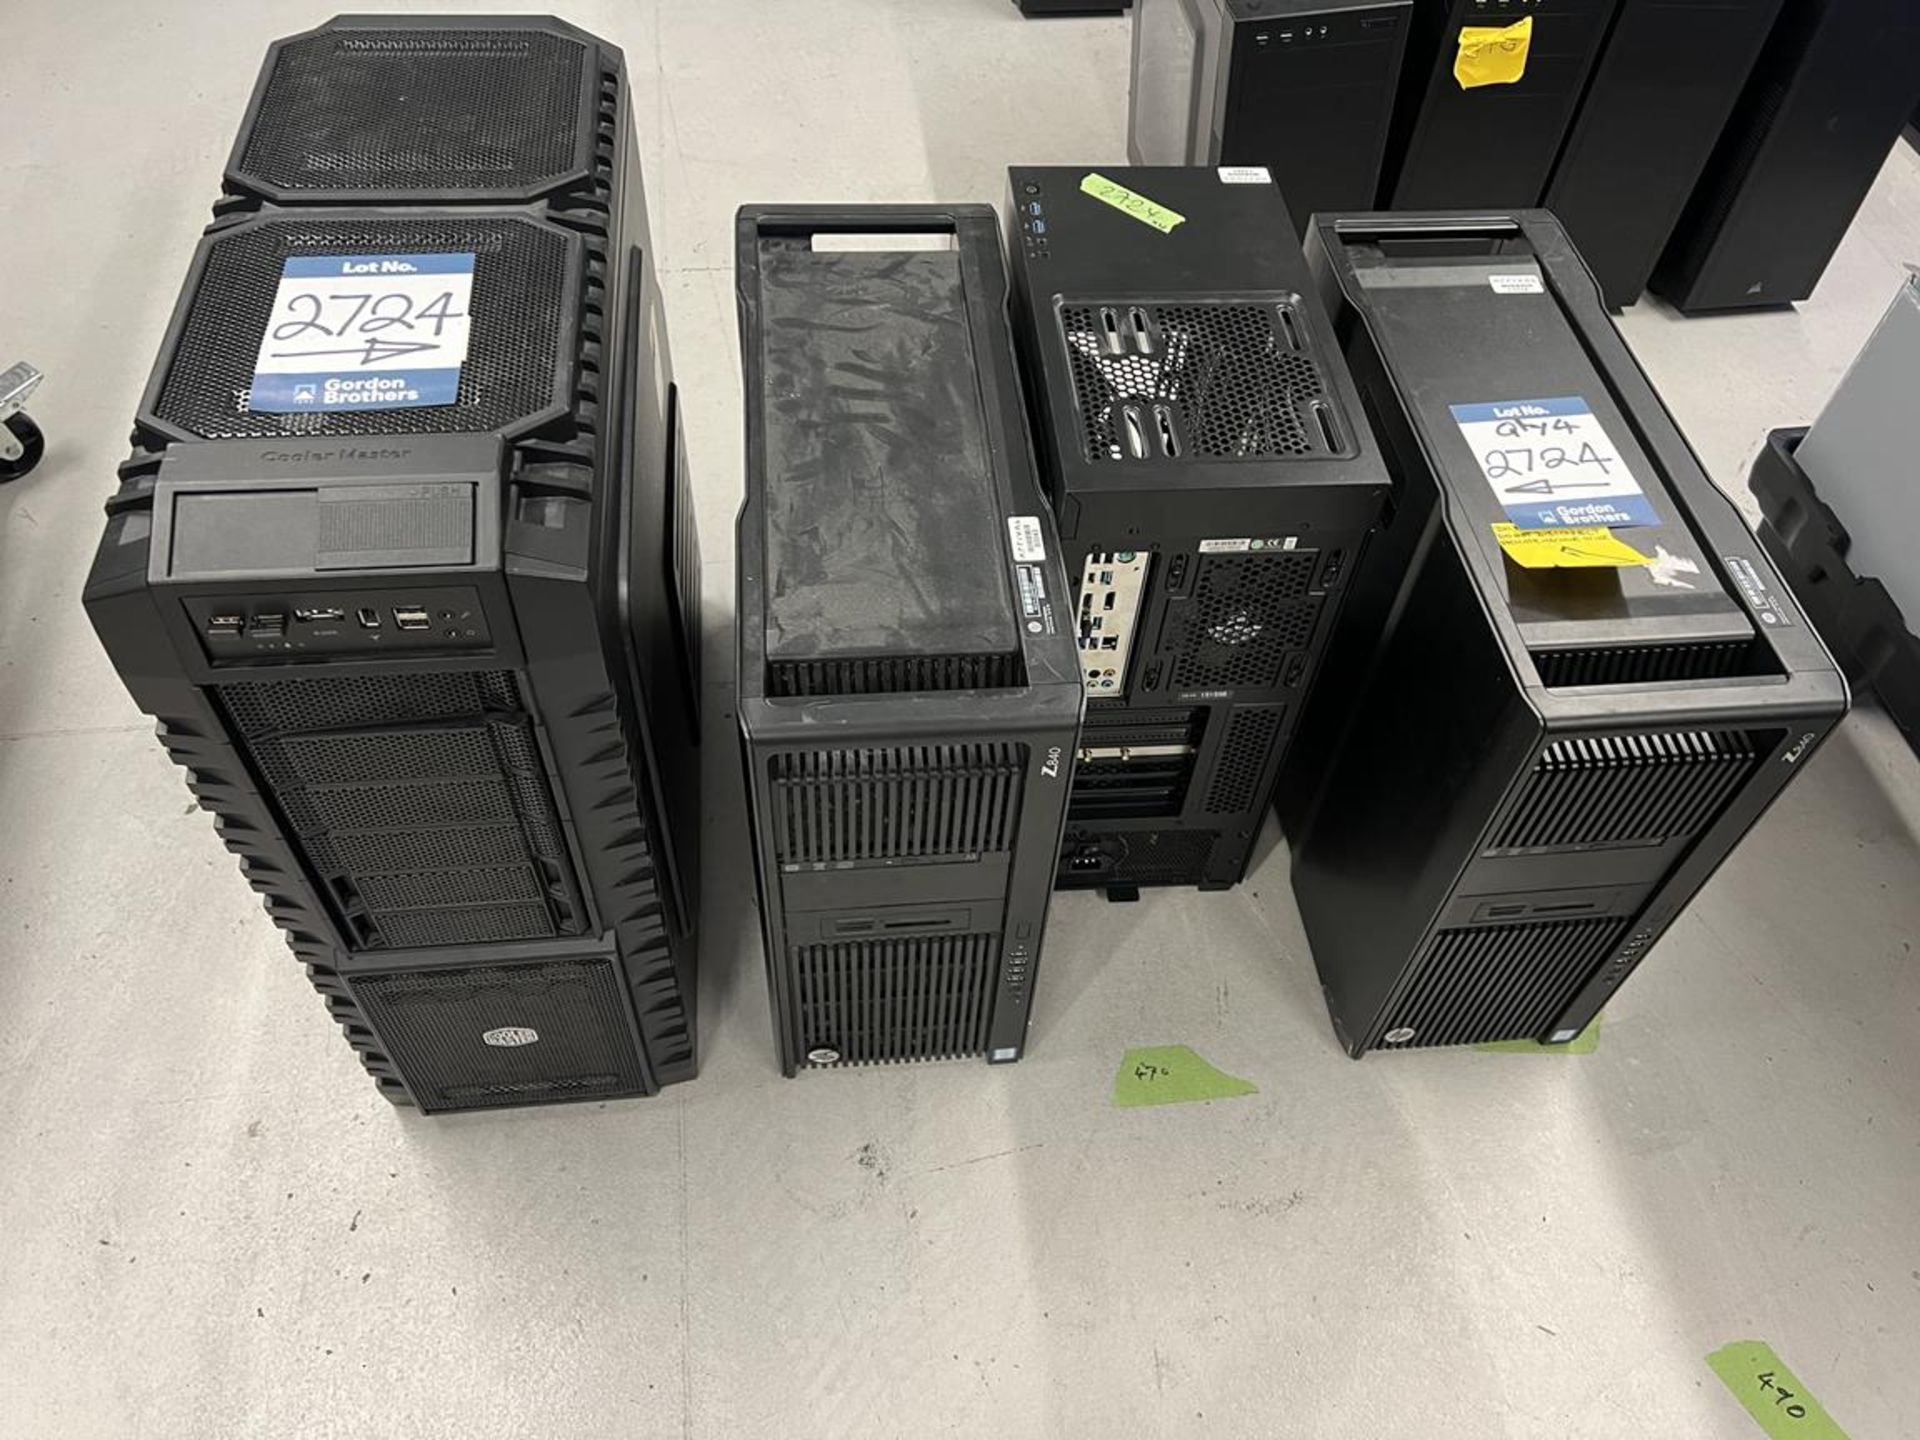 4x (no.) computer towers used for CAD (NO HDD and NO RAM)